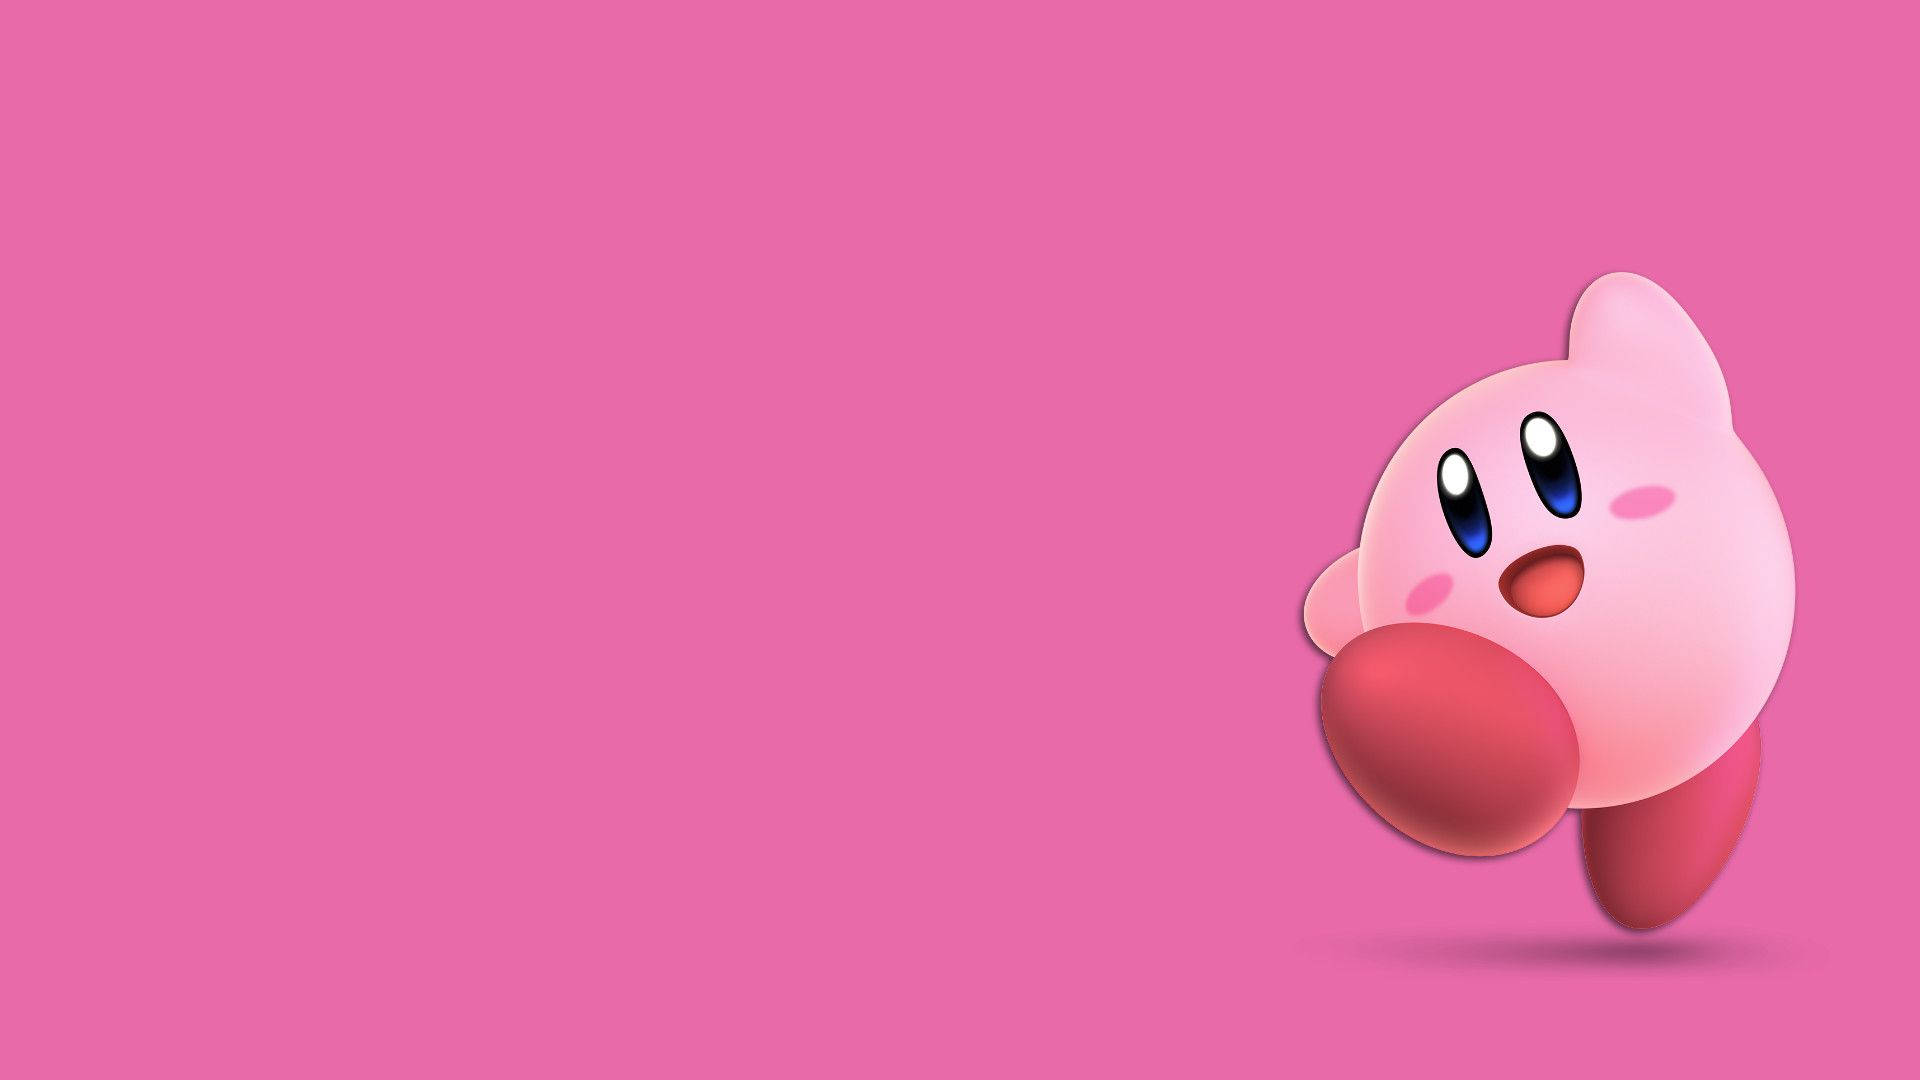 Get Ready to Play with Kirby! Wallpaper